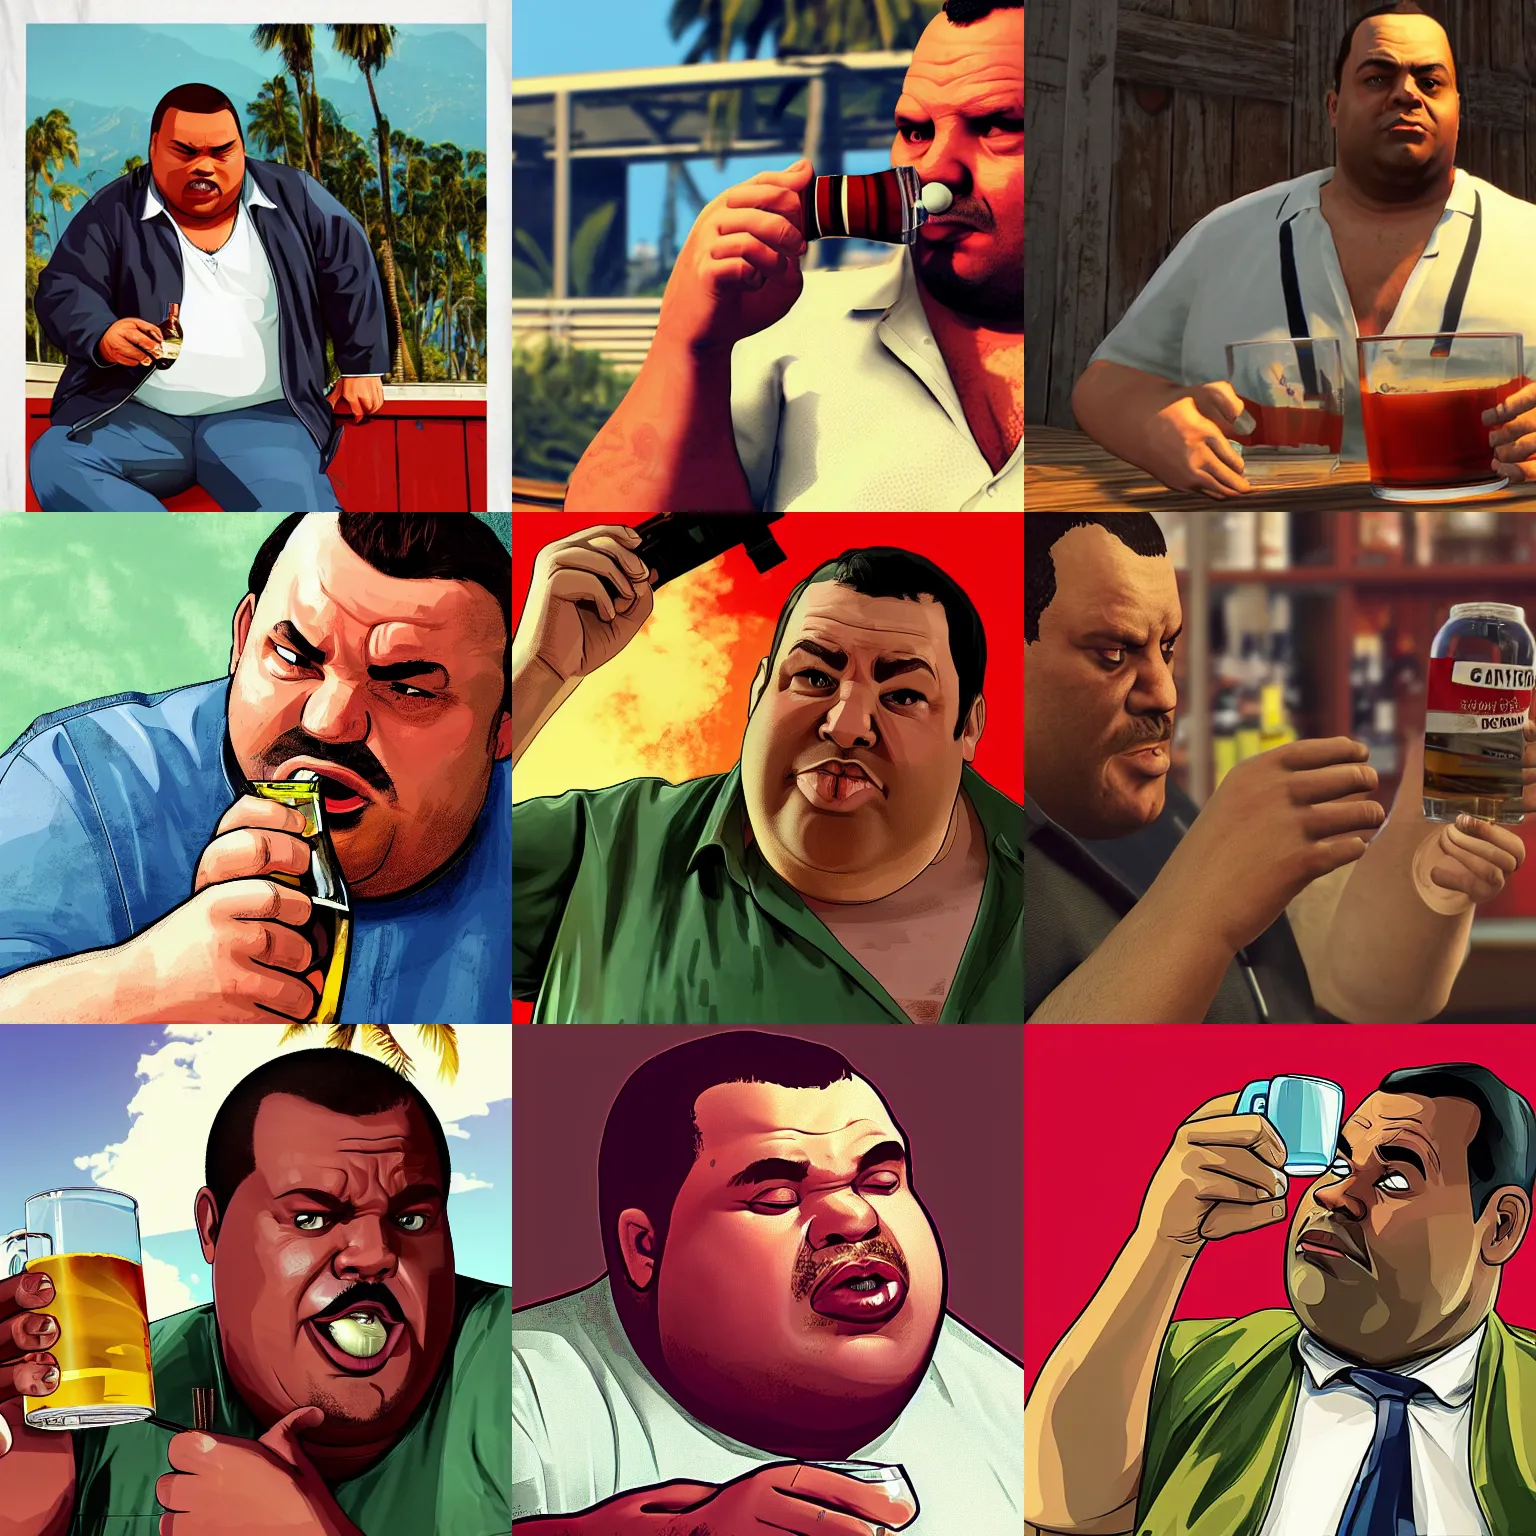 Prompt: Slightly overweight man drinking rum, closeup, GTA V poster